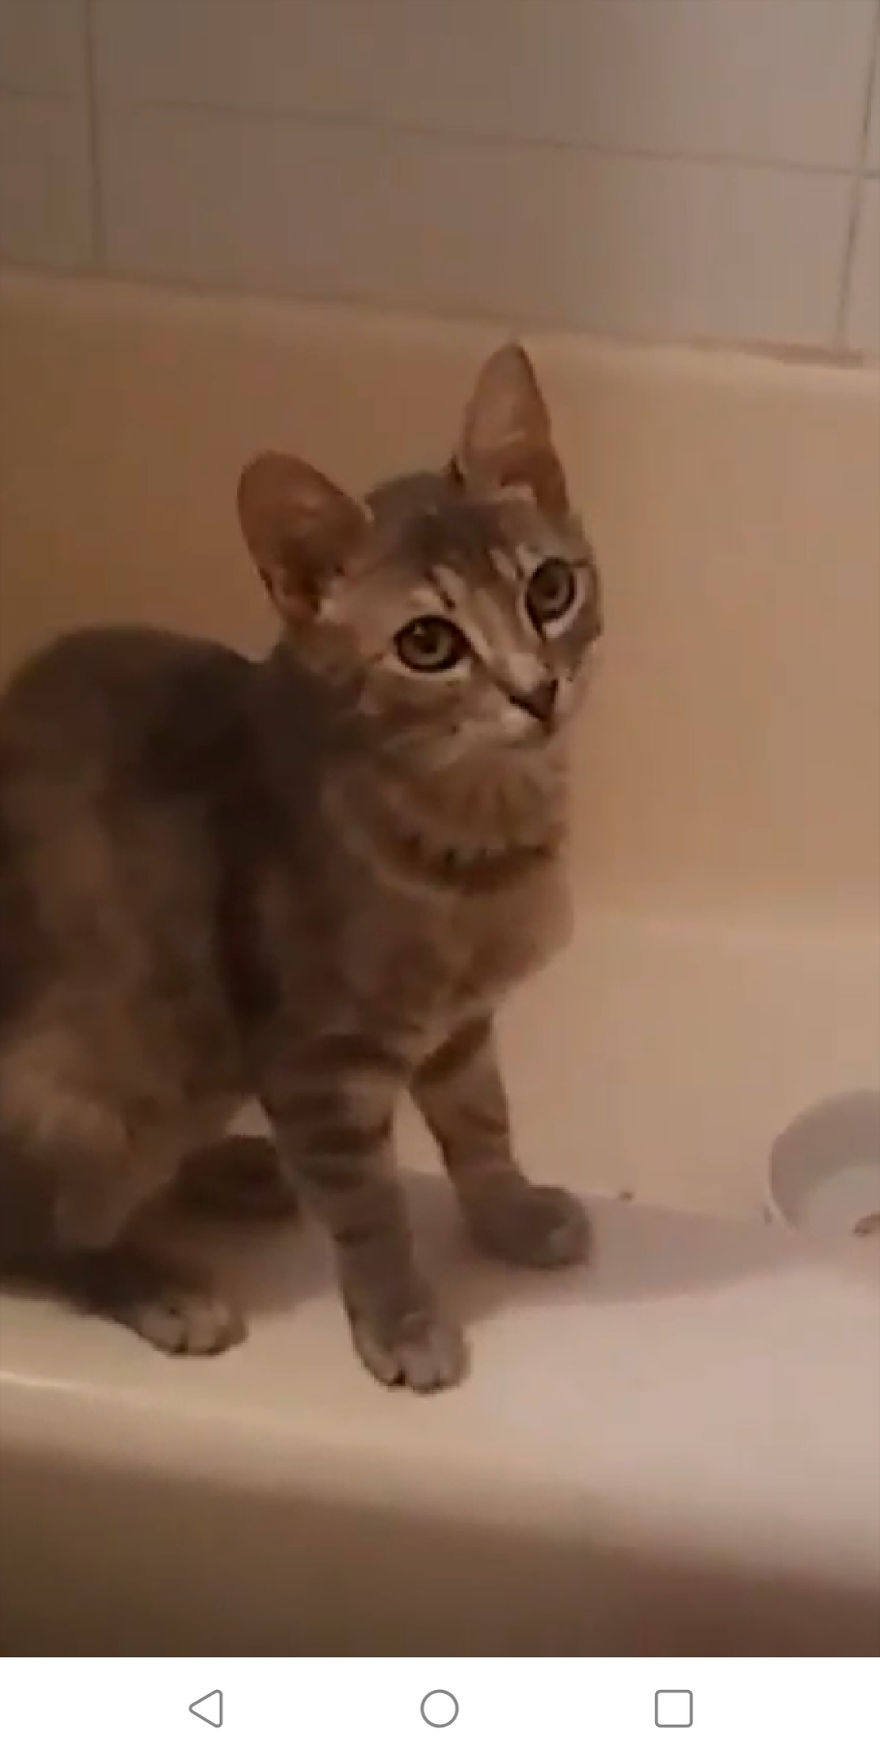 Keewee Kitty Rescued From Wrongful Diagnosis